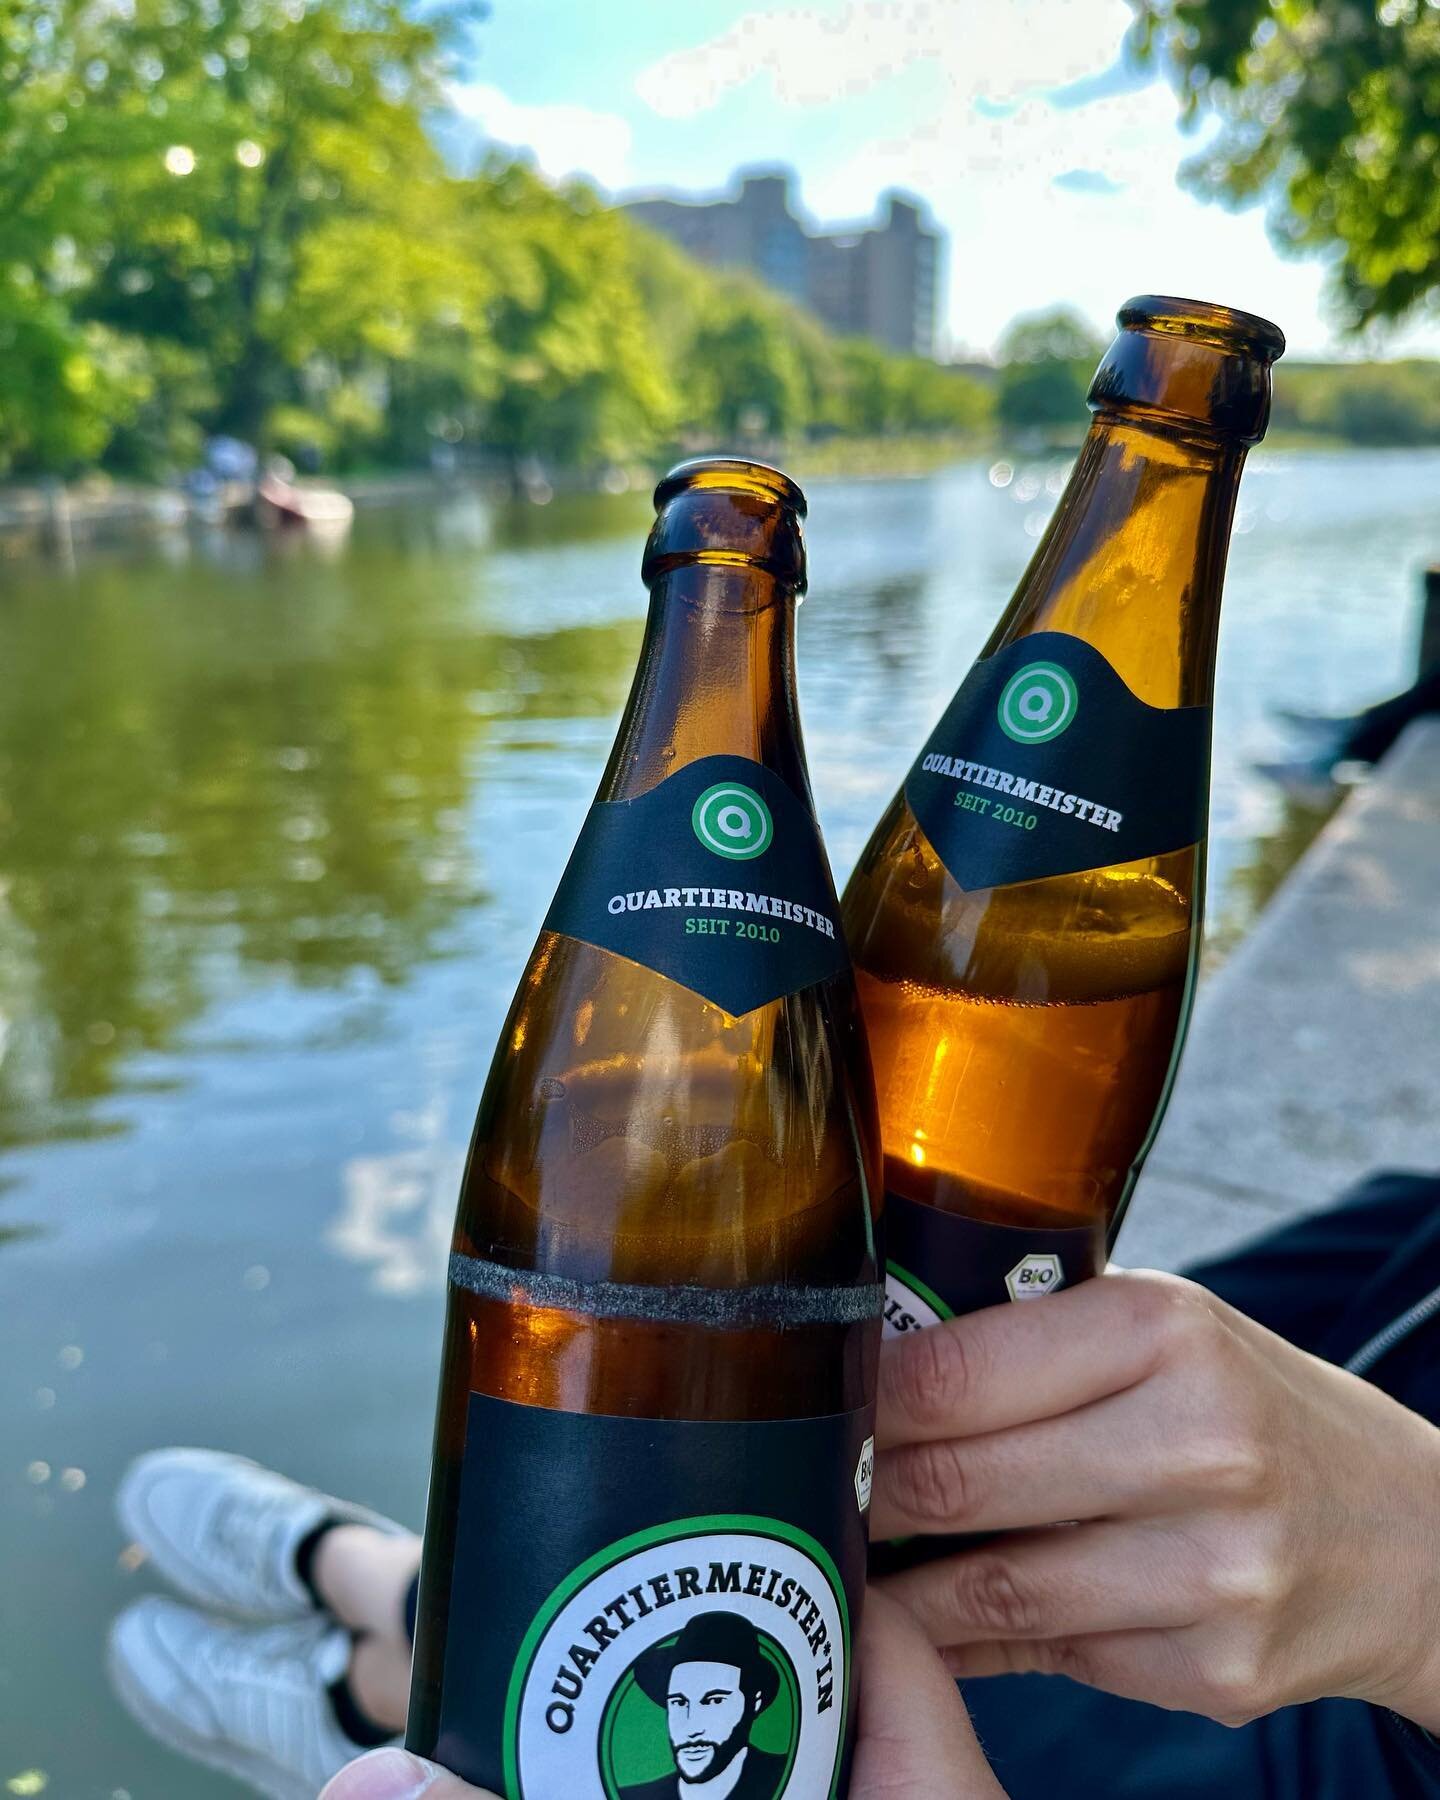 🍻 Cheers and happy weekend from Berlin!

🚤 People are already gathering at the Landwehrkanal and the Admiralbr&uuml;cke

🍺 I&rsquo;m enjoying a @quartiermeister_official beer - they do amazing social projects in Berlin

📺 No advertising, I&rsquo;